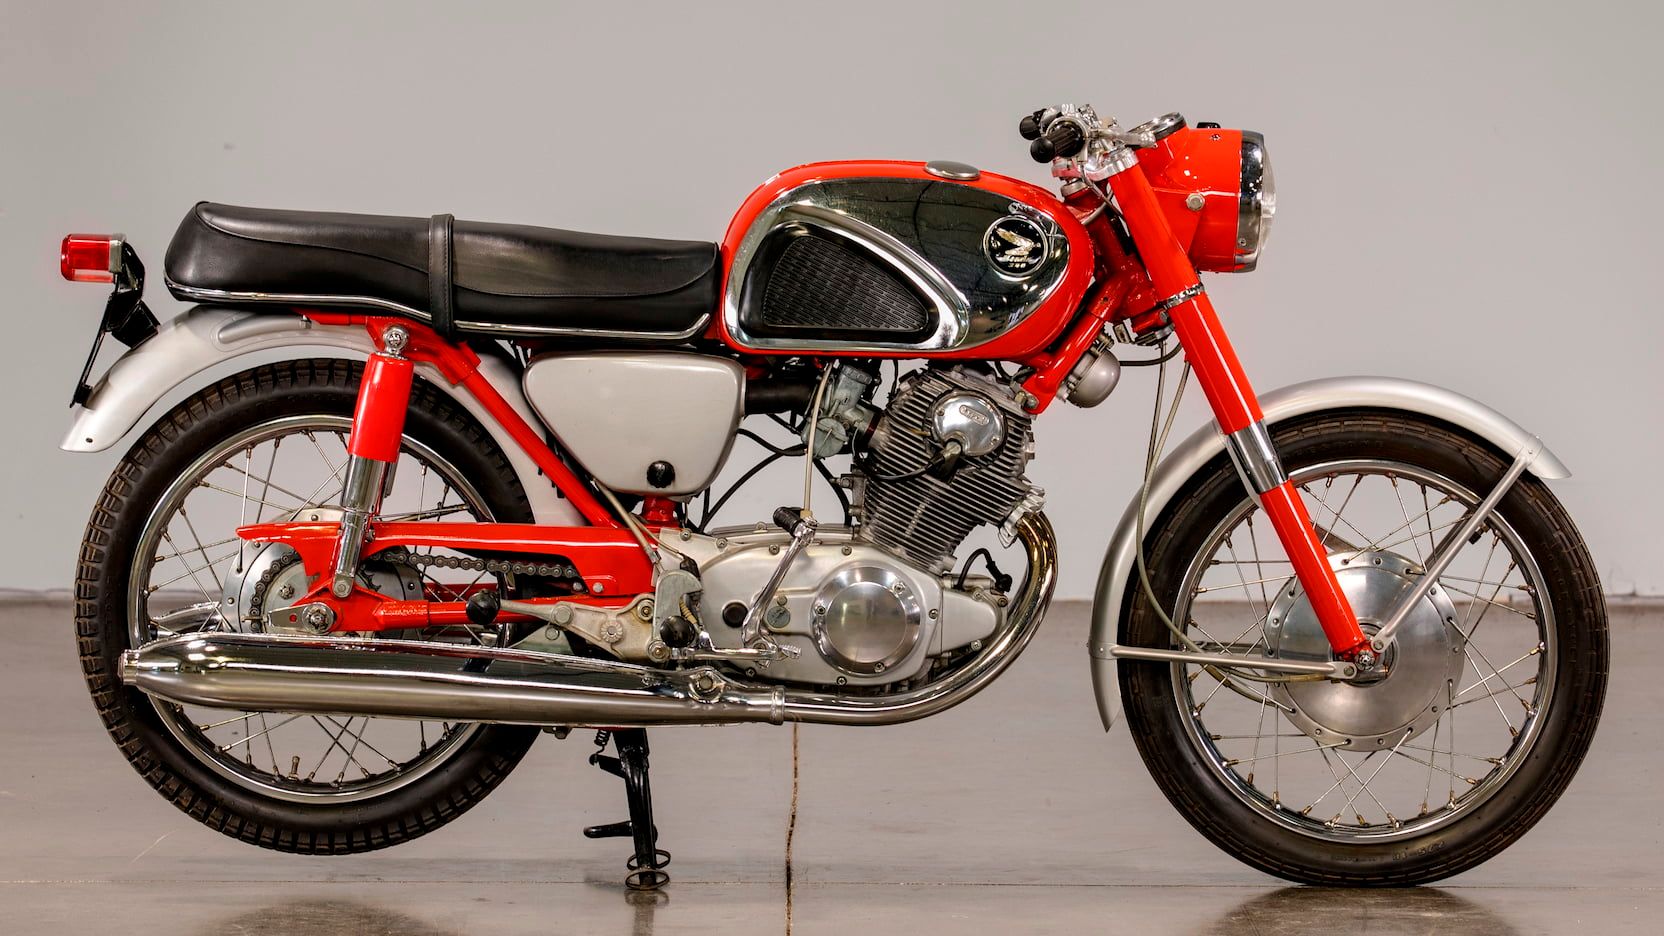 10 Most Significant Honda Motorcycles of All Time